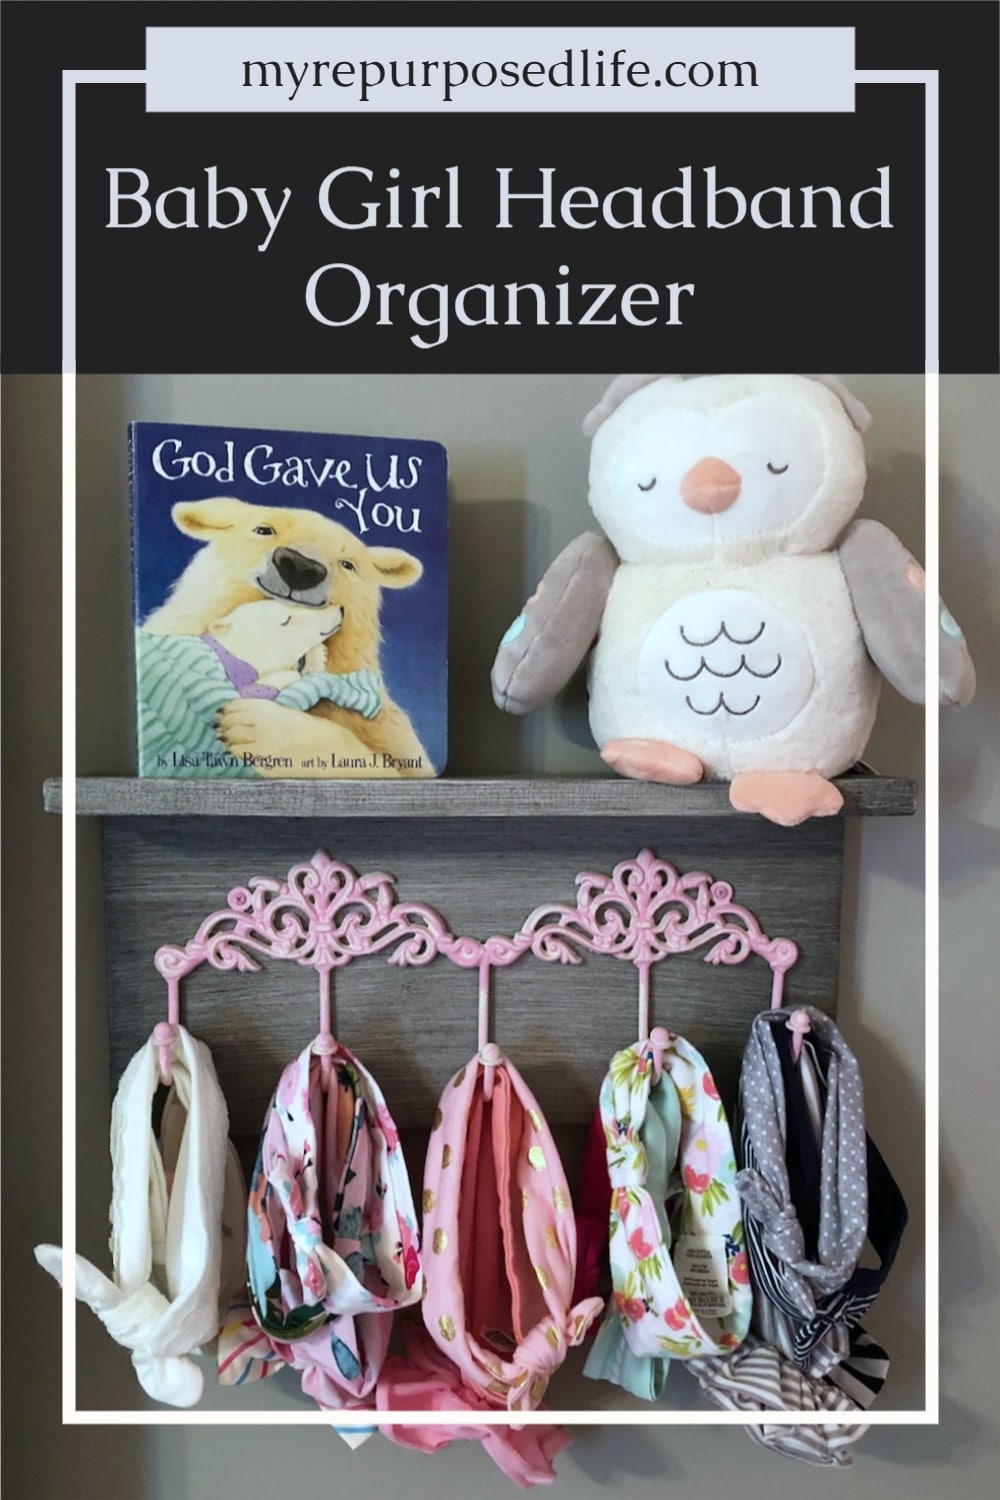 How to use scrap wood and decorative hooks to make a simple baby girl headband organizer shelf. Step by step directions and tips to do it yourself. Baby girls have a lot of headbands! #MyRepurposedLife #babygirl #headband #organizer #scrapwood via @repurposedlife